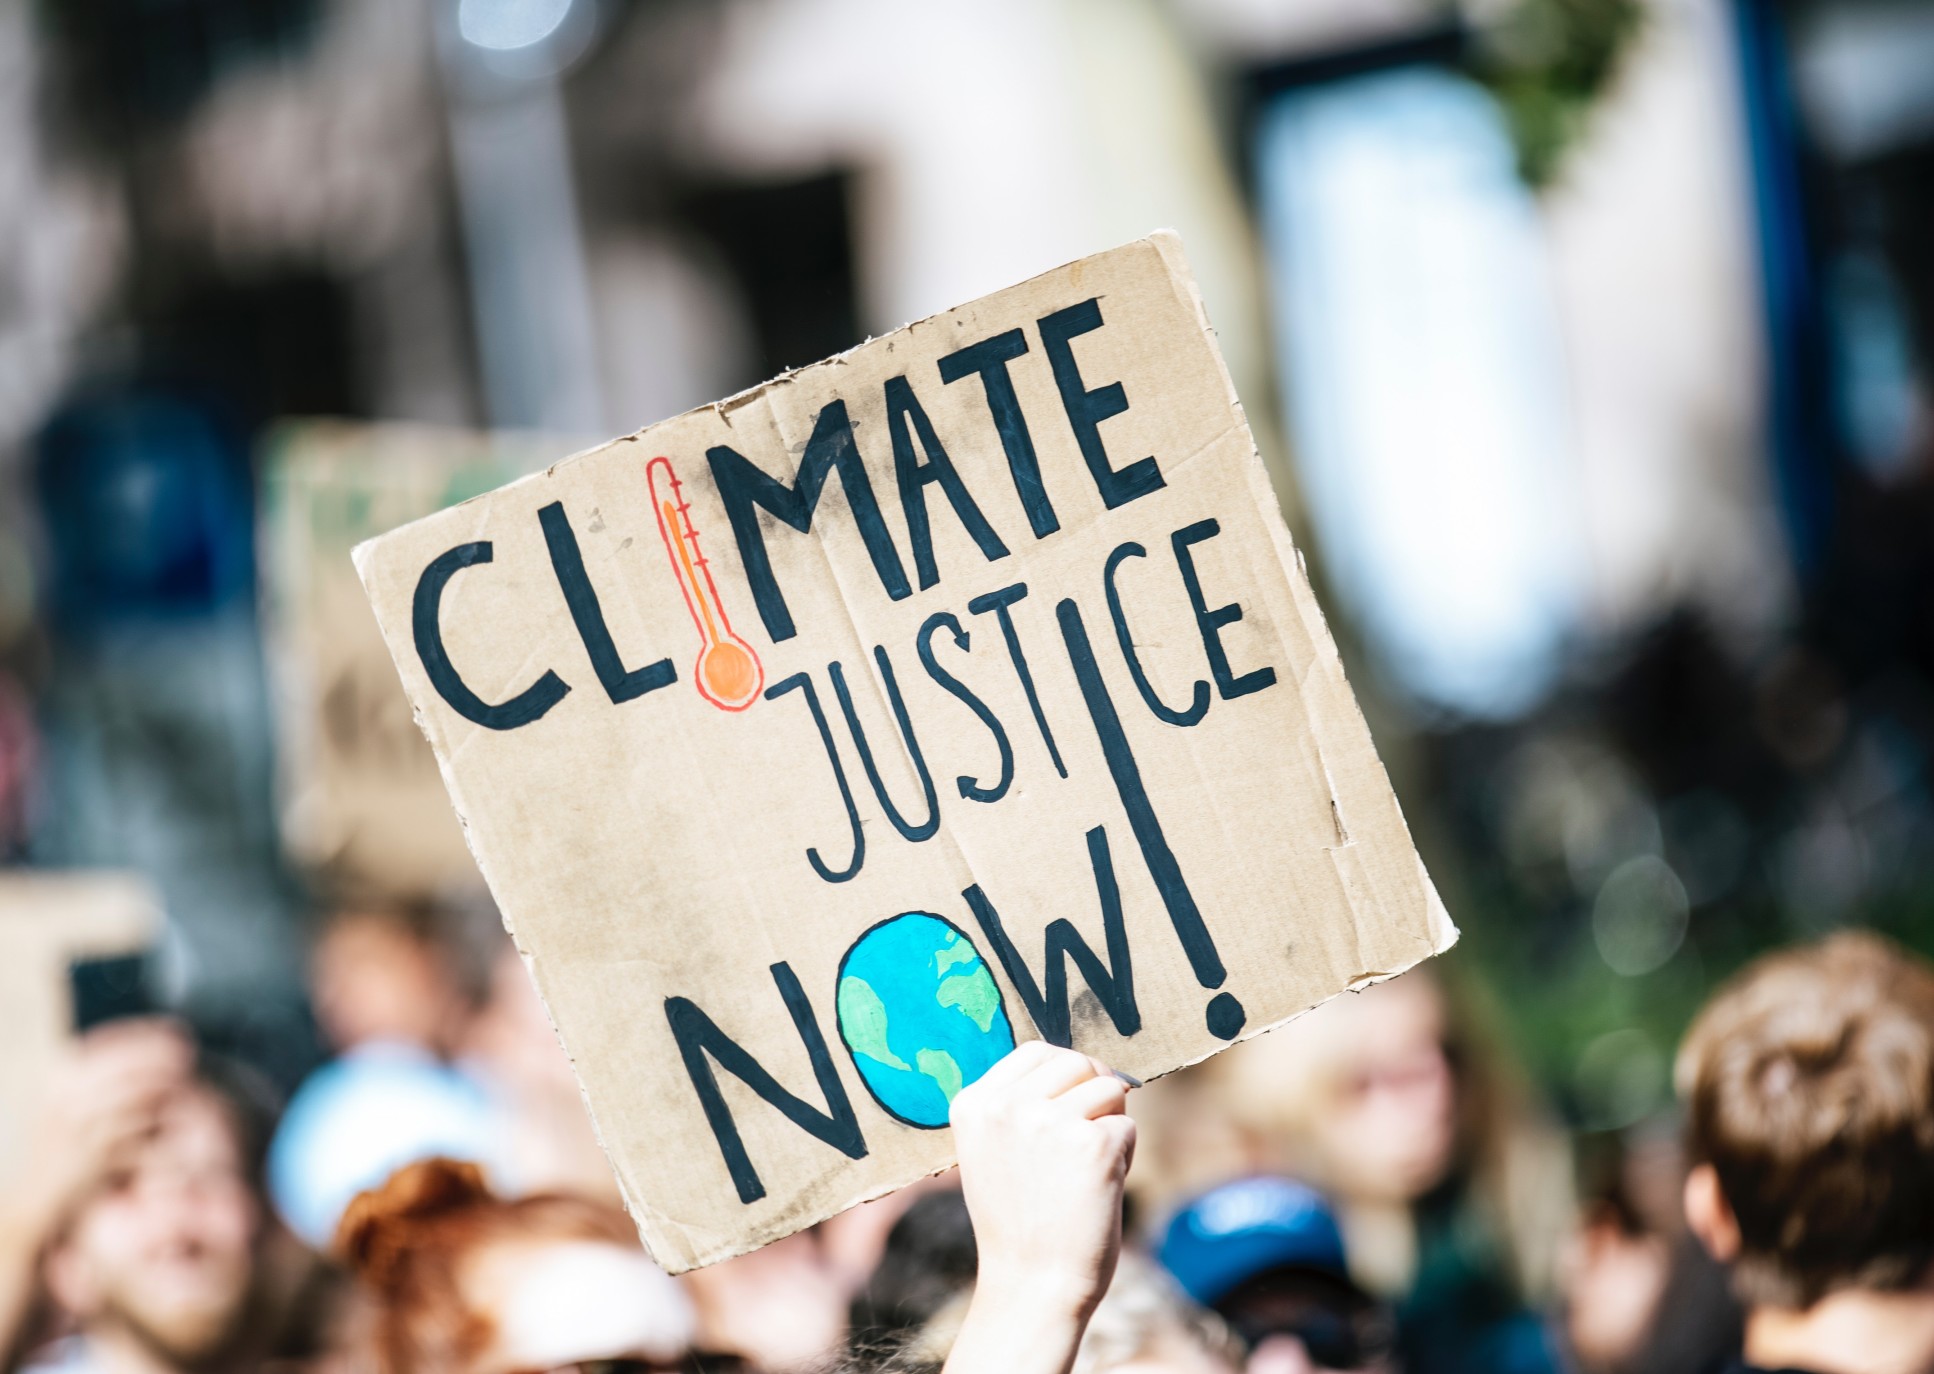 Climate justice now protest